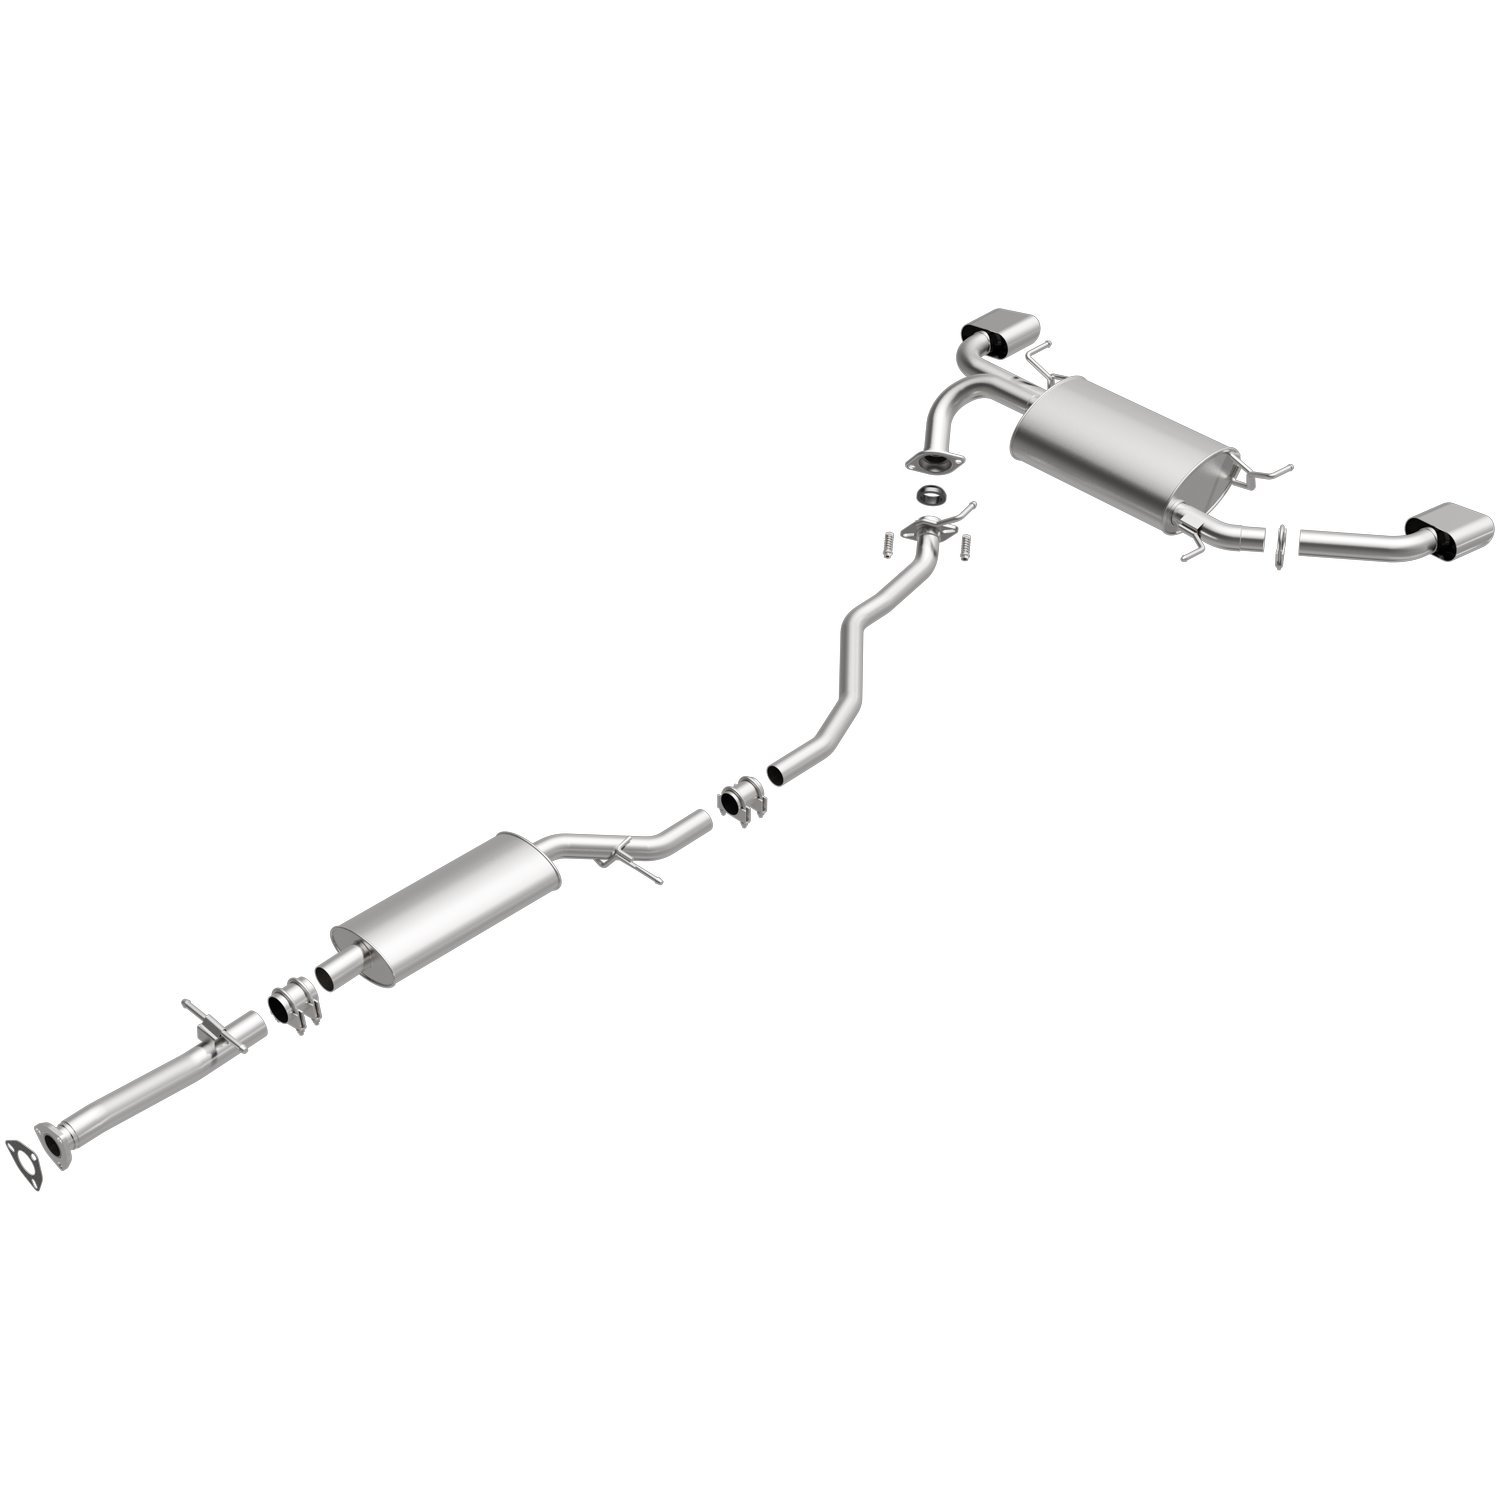 Direct-Fit Exhaust Kit, 2010-2012 Acura RDX 2.3L